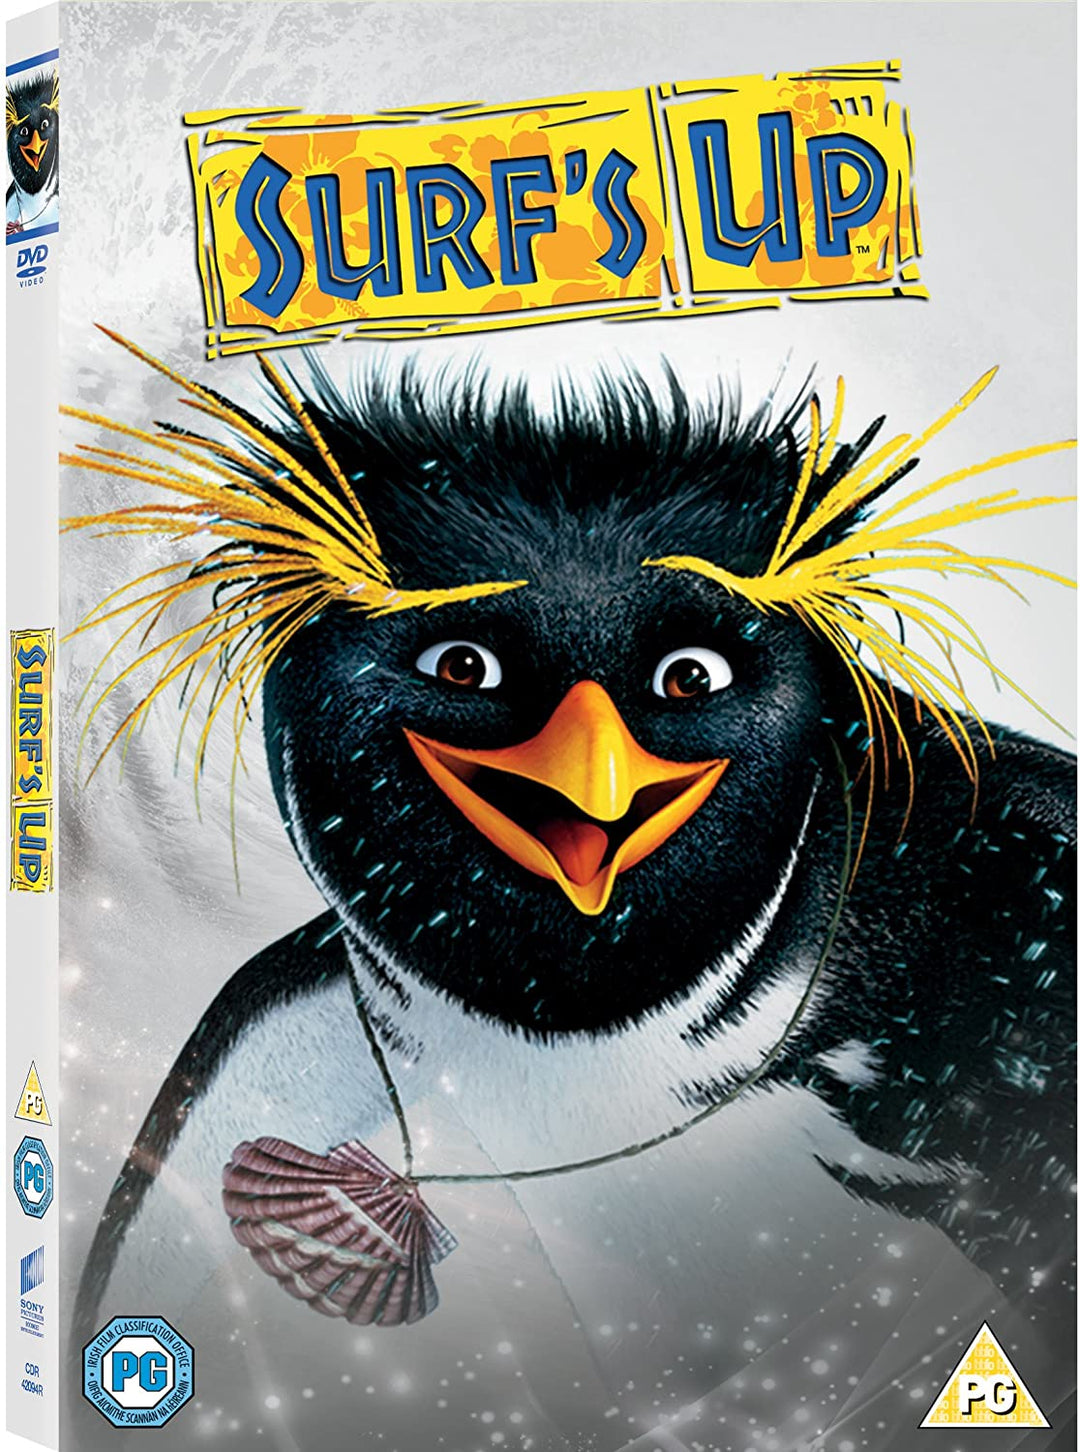 Surf's Up [2007] - Family/Comedy [DVD]